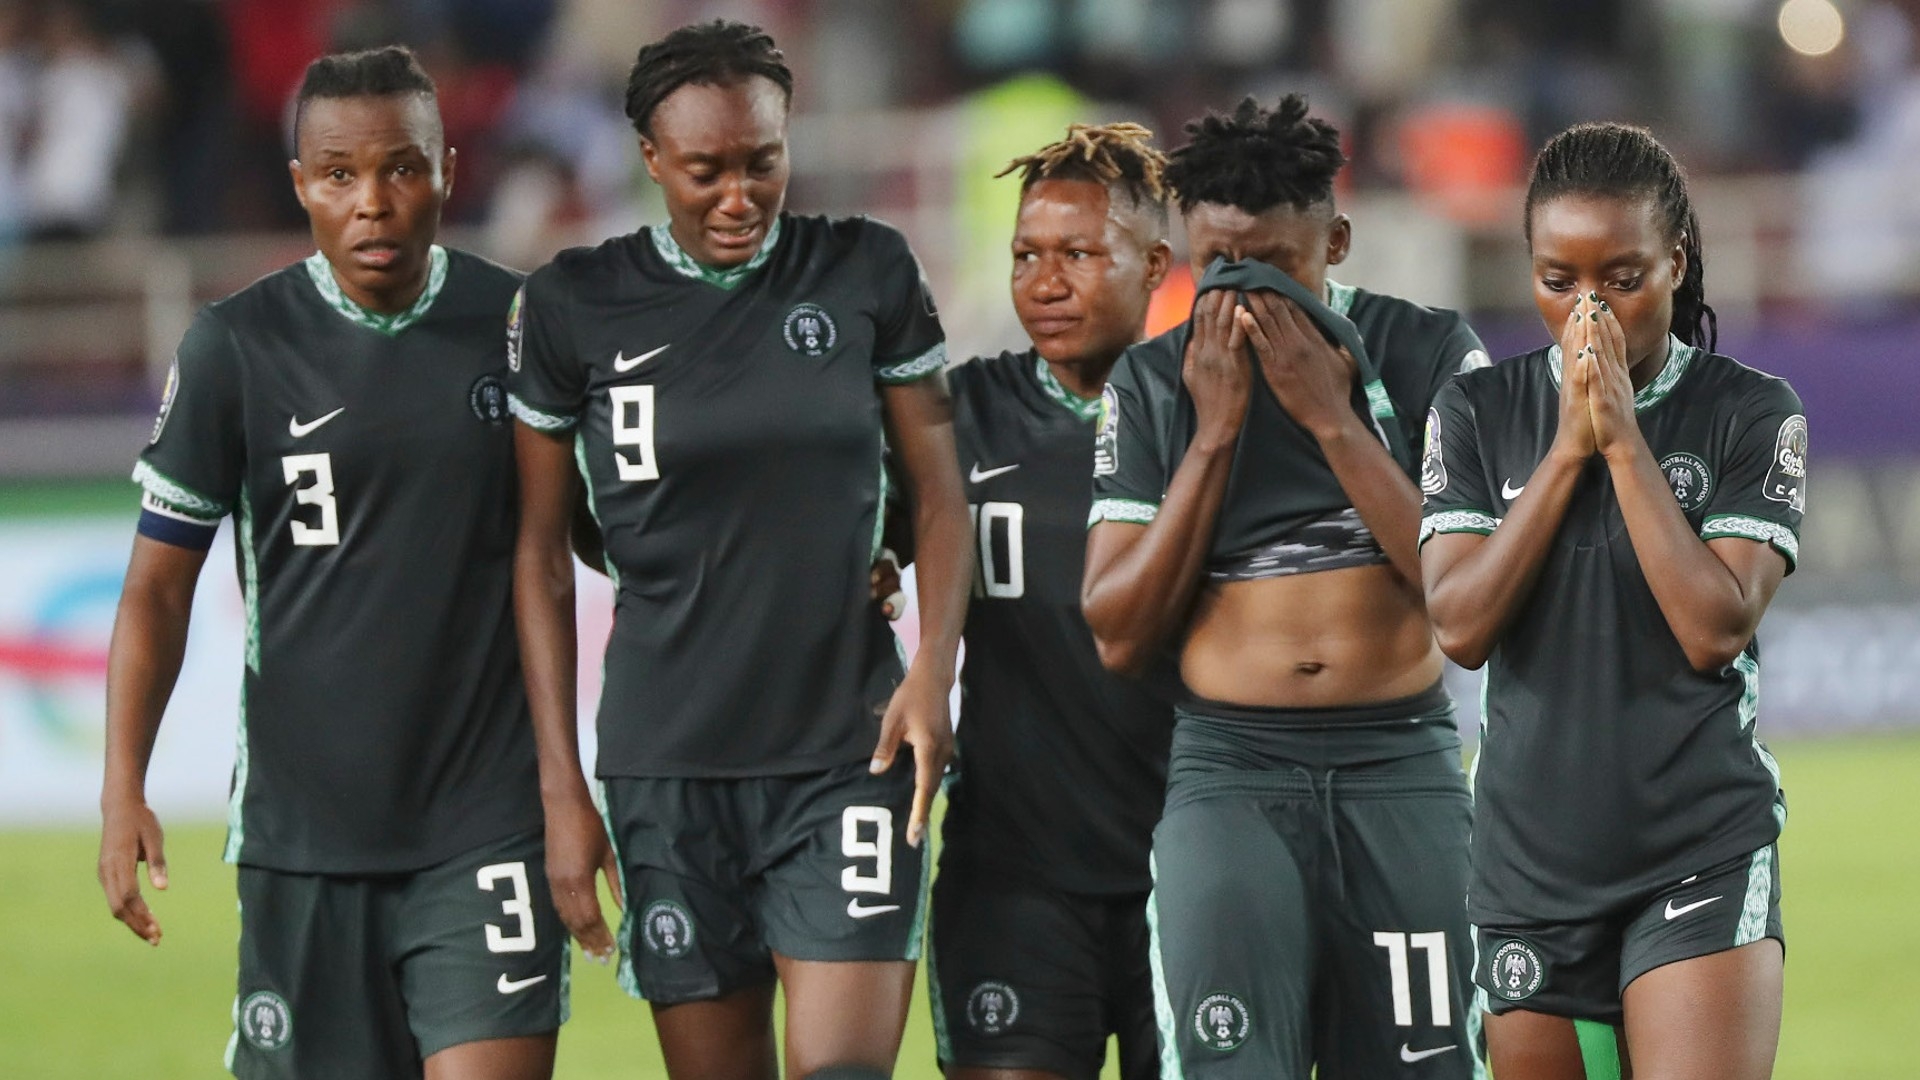 Super Falcons loss 2-0 to Japan in a friendly match